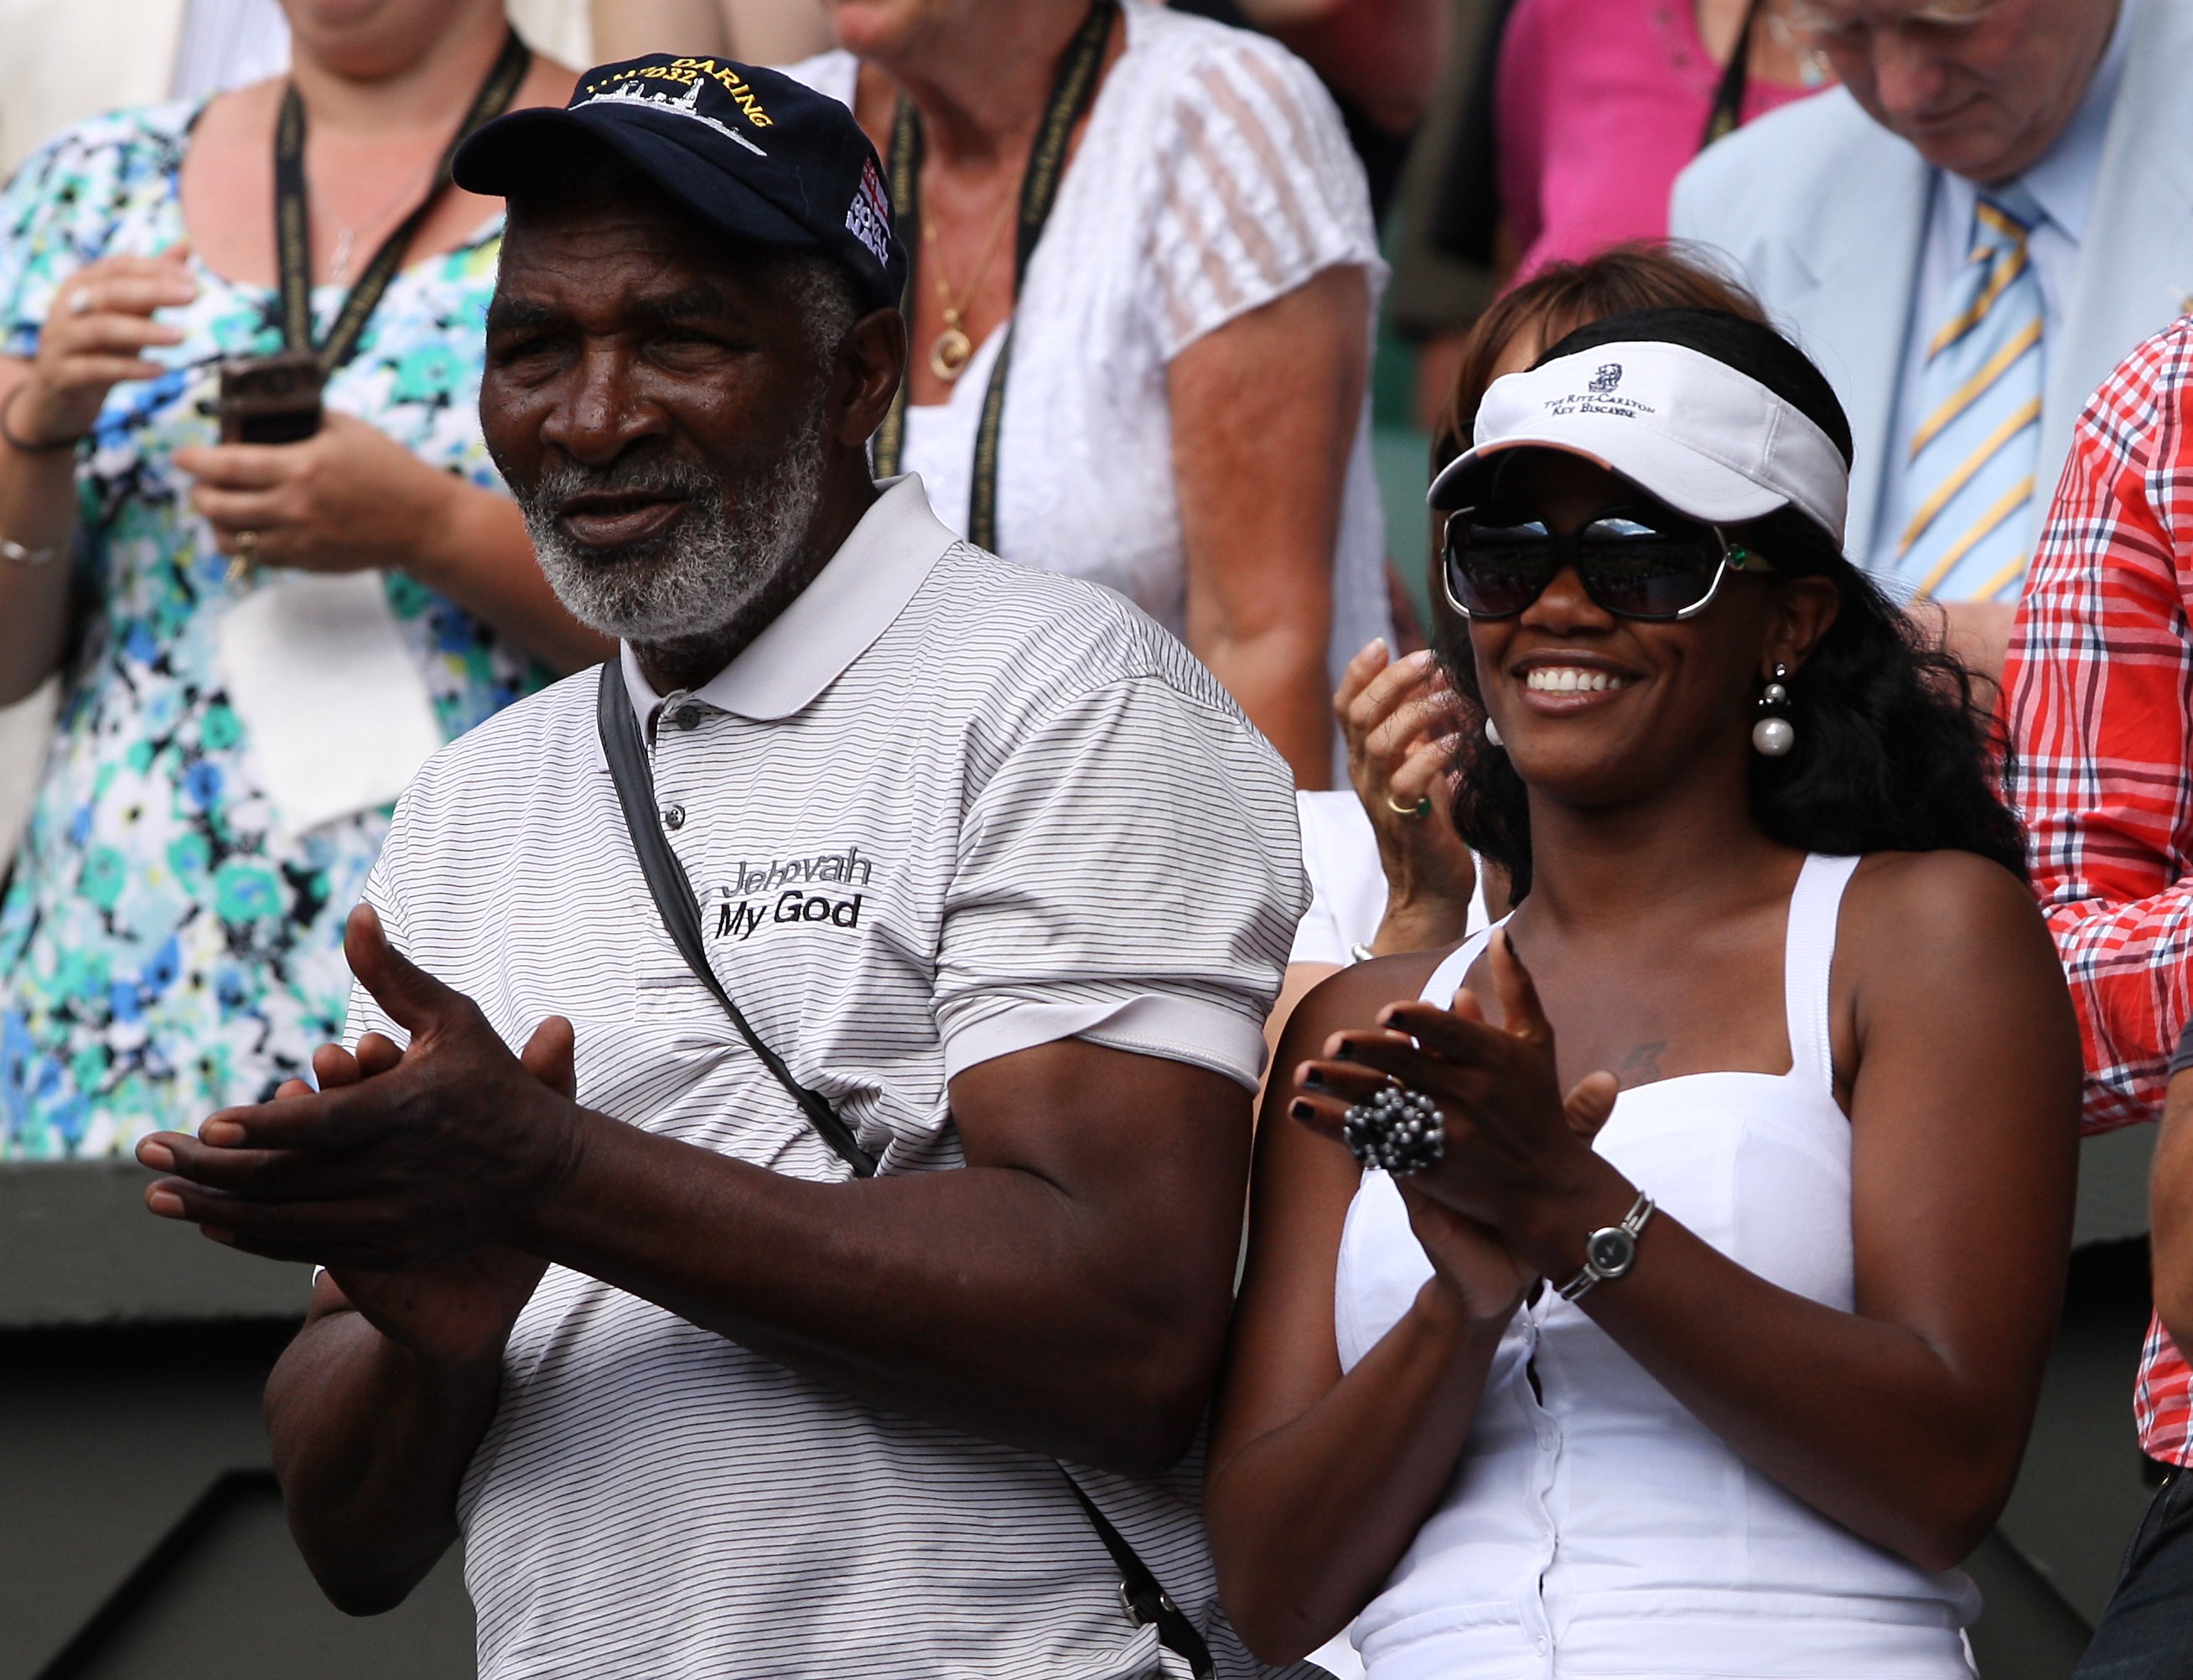  Richard Williams and Lakeisha Graham celebrate after Serena Williams' defeat against Russia's Vera Zvonareva in the Women's Final at the 2010 Wimbledon Championships | Source: Getty Images